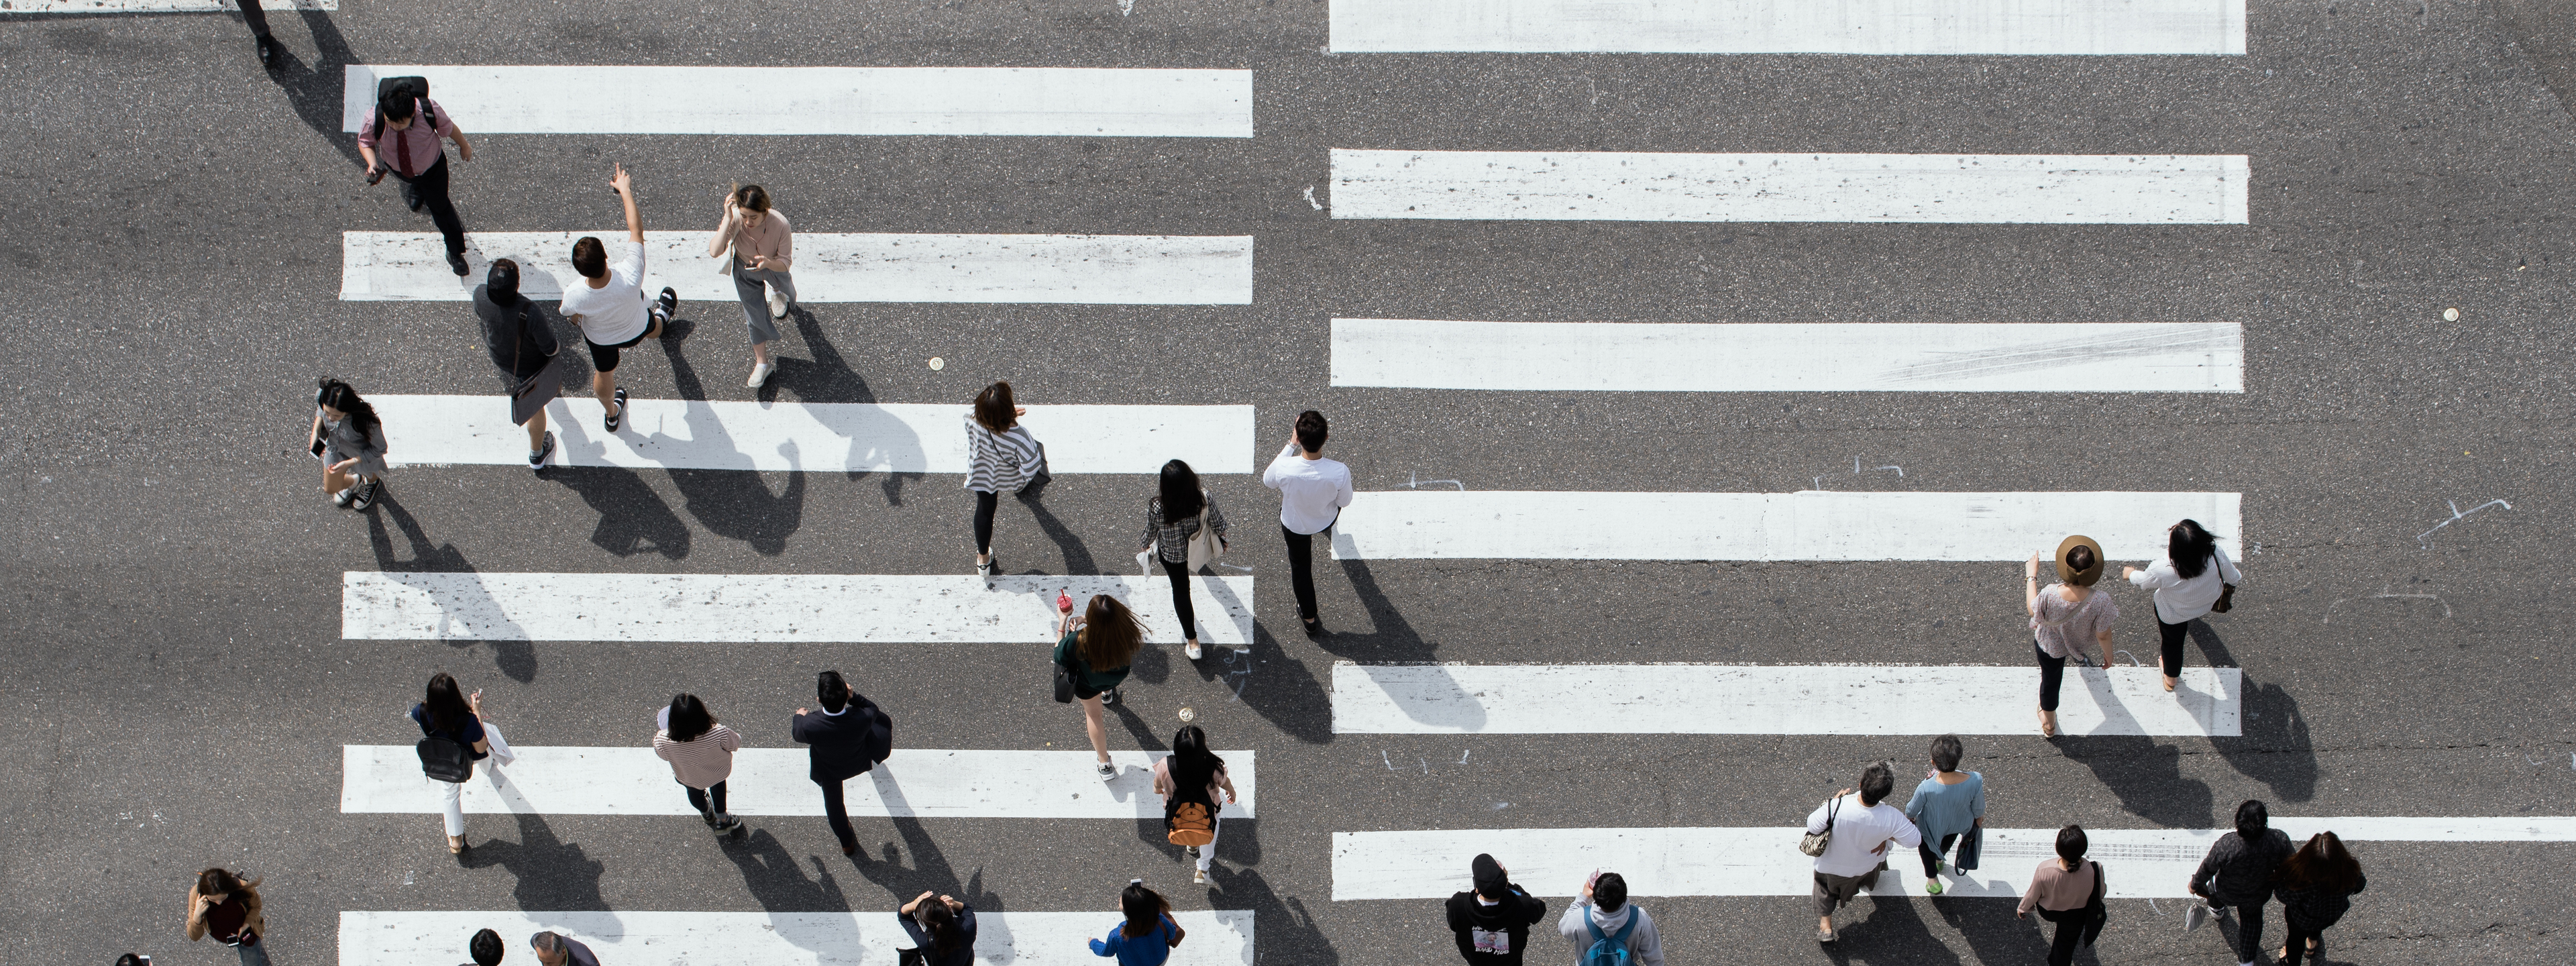 Aerial View of Busy Crosswalk with People, Seoul, Korea,